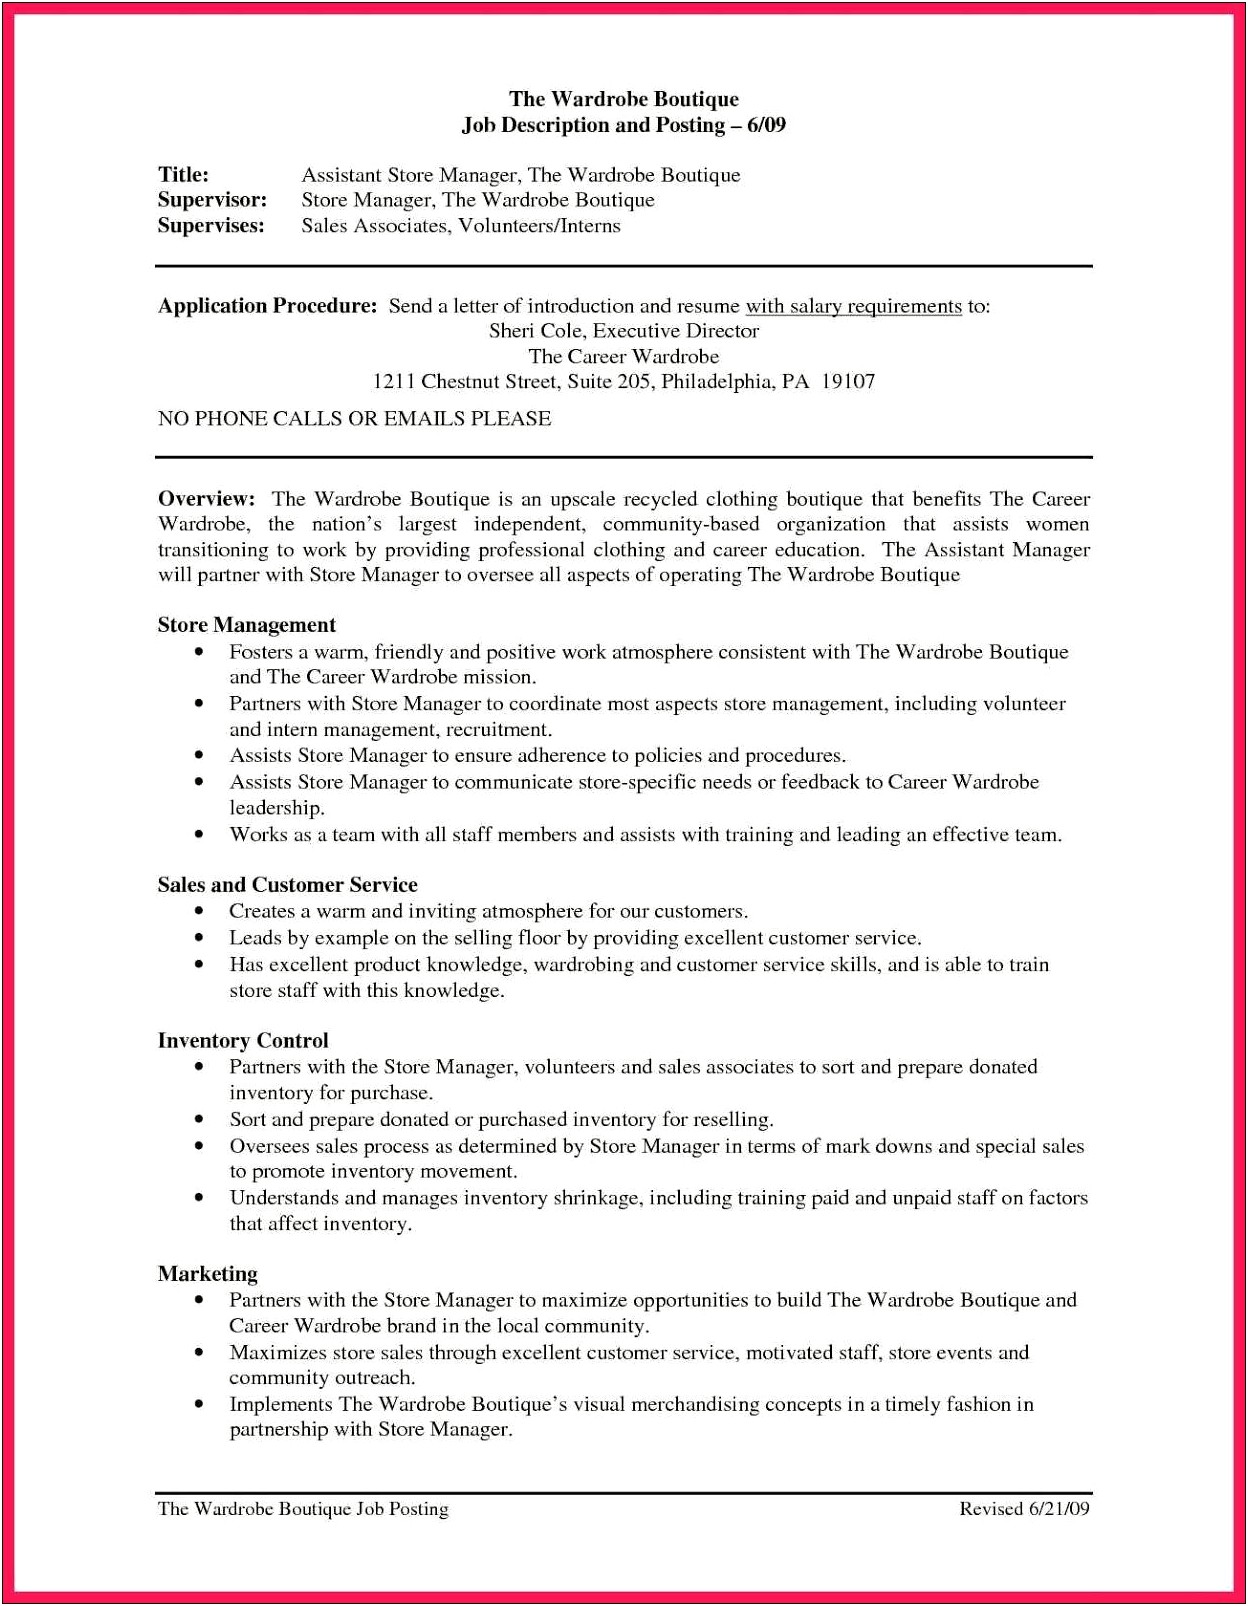 Employee Benefits Account Manager Resume Sample